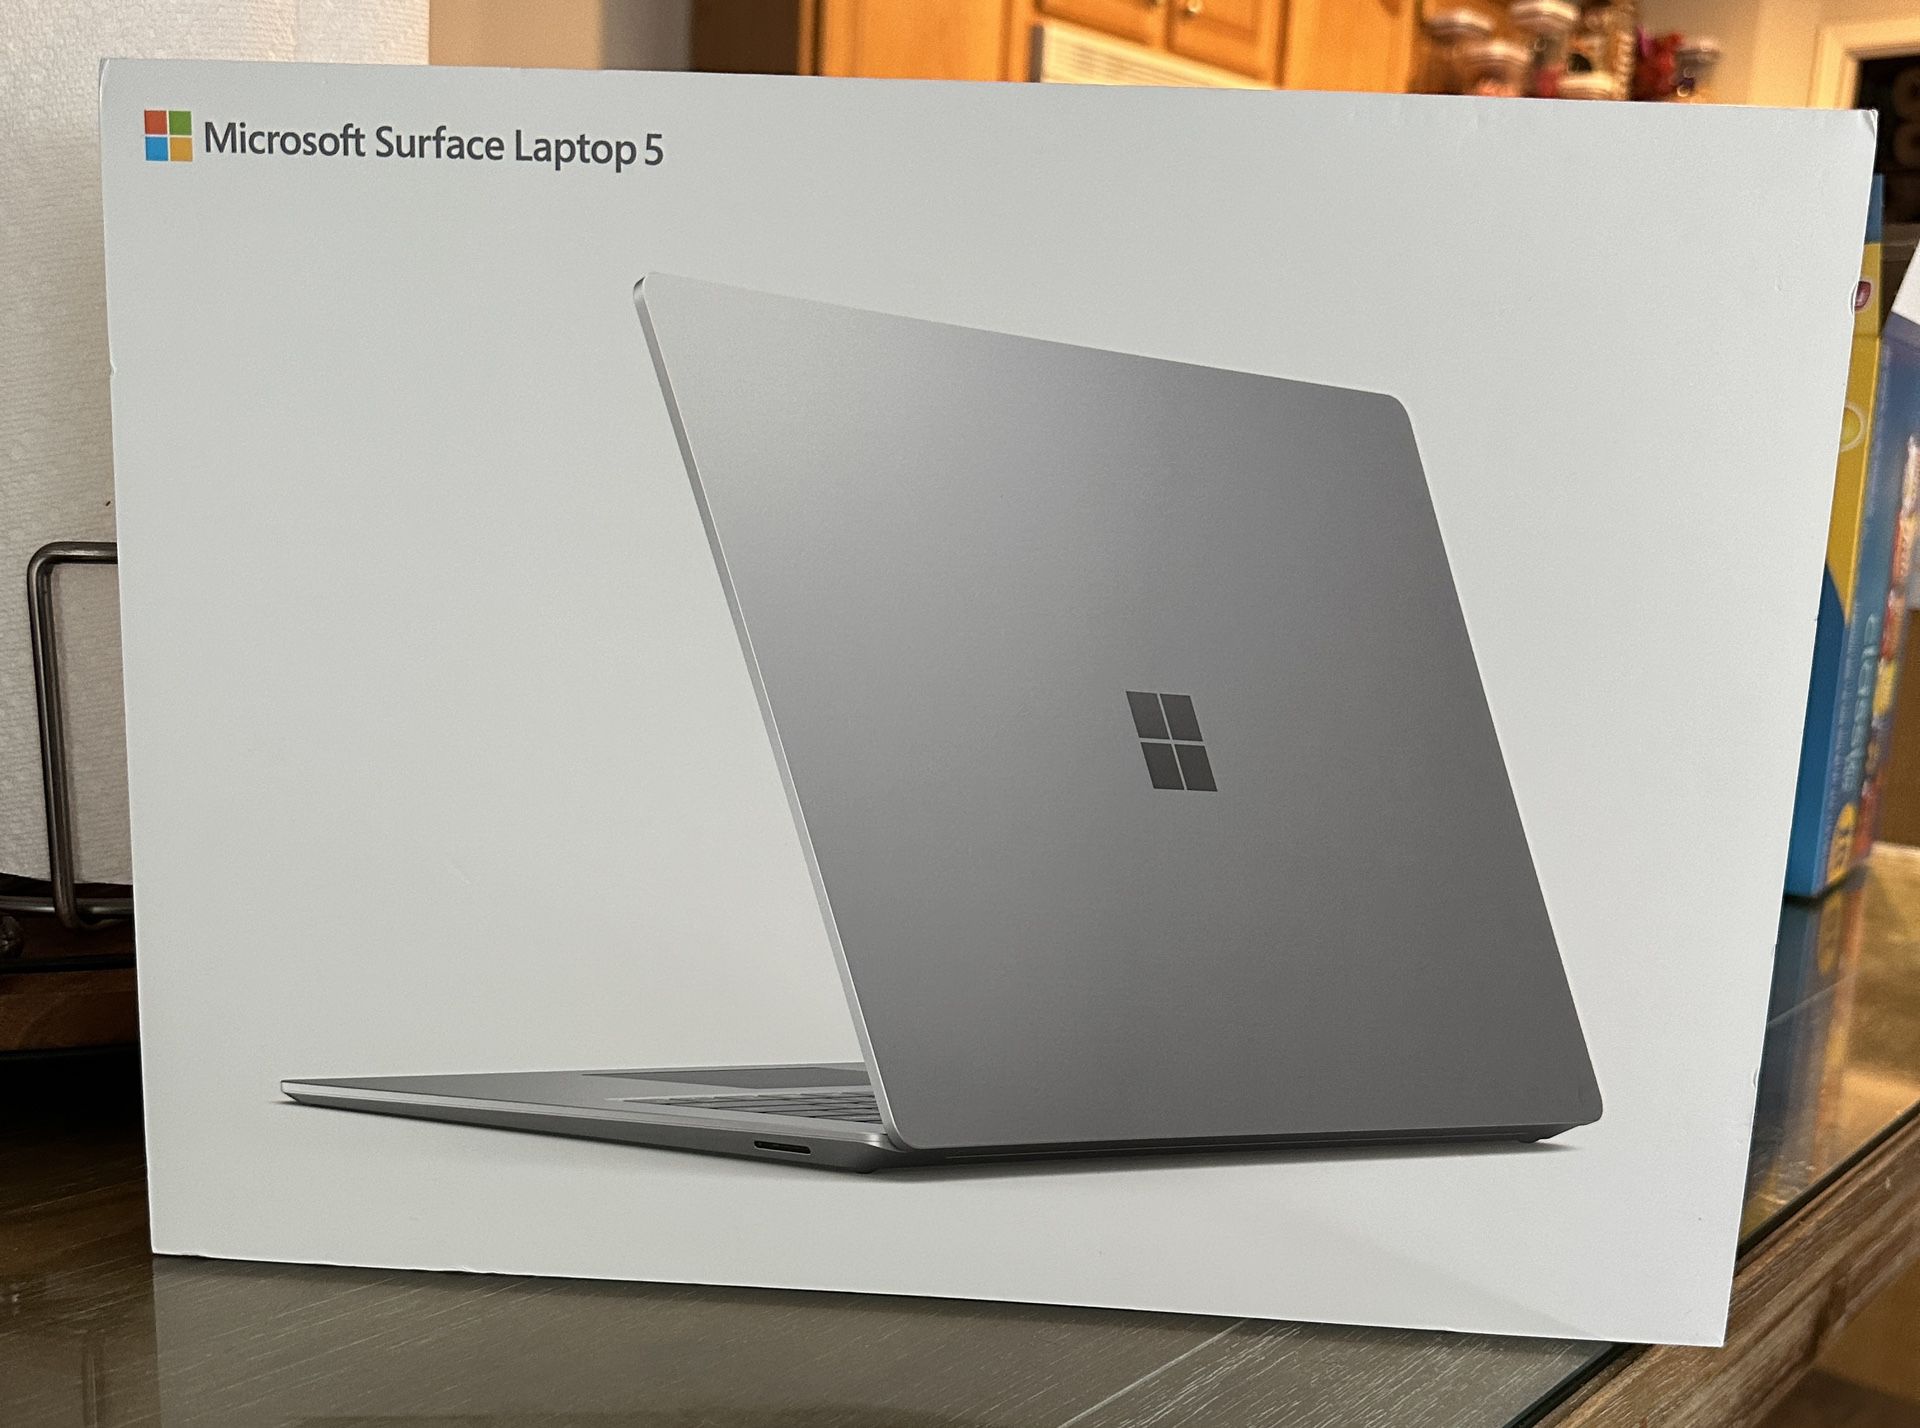 Microsoft Surface Laptop 5  With 15 Inch Screen   